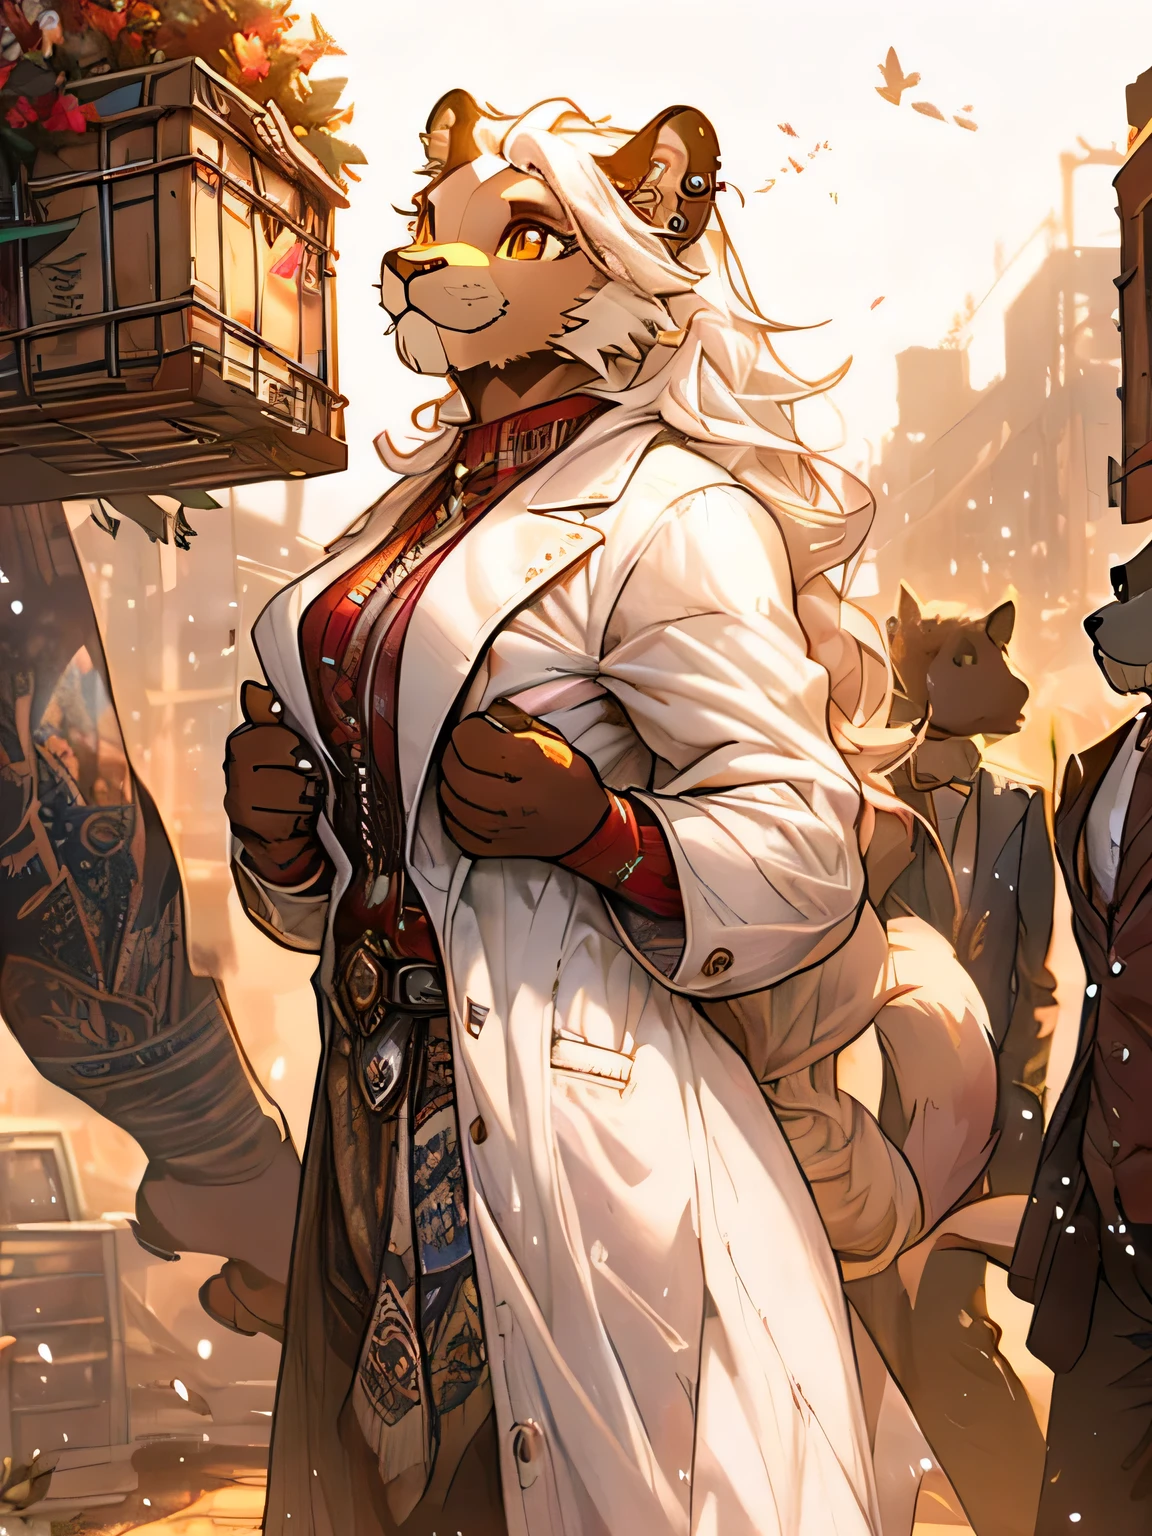 A commanding, confident, athletic male lion [1boy] with strikingly detailed, piercing golden eyes [beautiful detailed eyes], white hair, (white fur), shouts across to workers on a series of stacked crates, furry, dressed in a vibrant red trench coat [red trench coat]. She commands a group of workers, directing them to move heavy objects [ordering workers to move things] amidst the thick, dusty air. The image is of the highest quality [best quality, high-res, 4k, masterpiece:1.2], steampunk_costume, capturing the ultra-detailed features of every element in the scene. The artistic style combines elements of realism and concept art, with a dominant color palette of muted red tones contrasting against the dusty surroundings. Interesting composition, depth of field, interesting perspective, full body